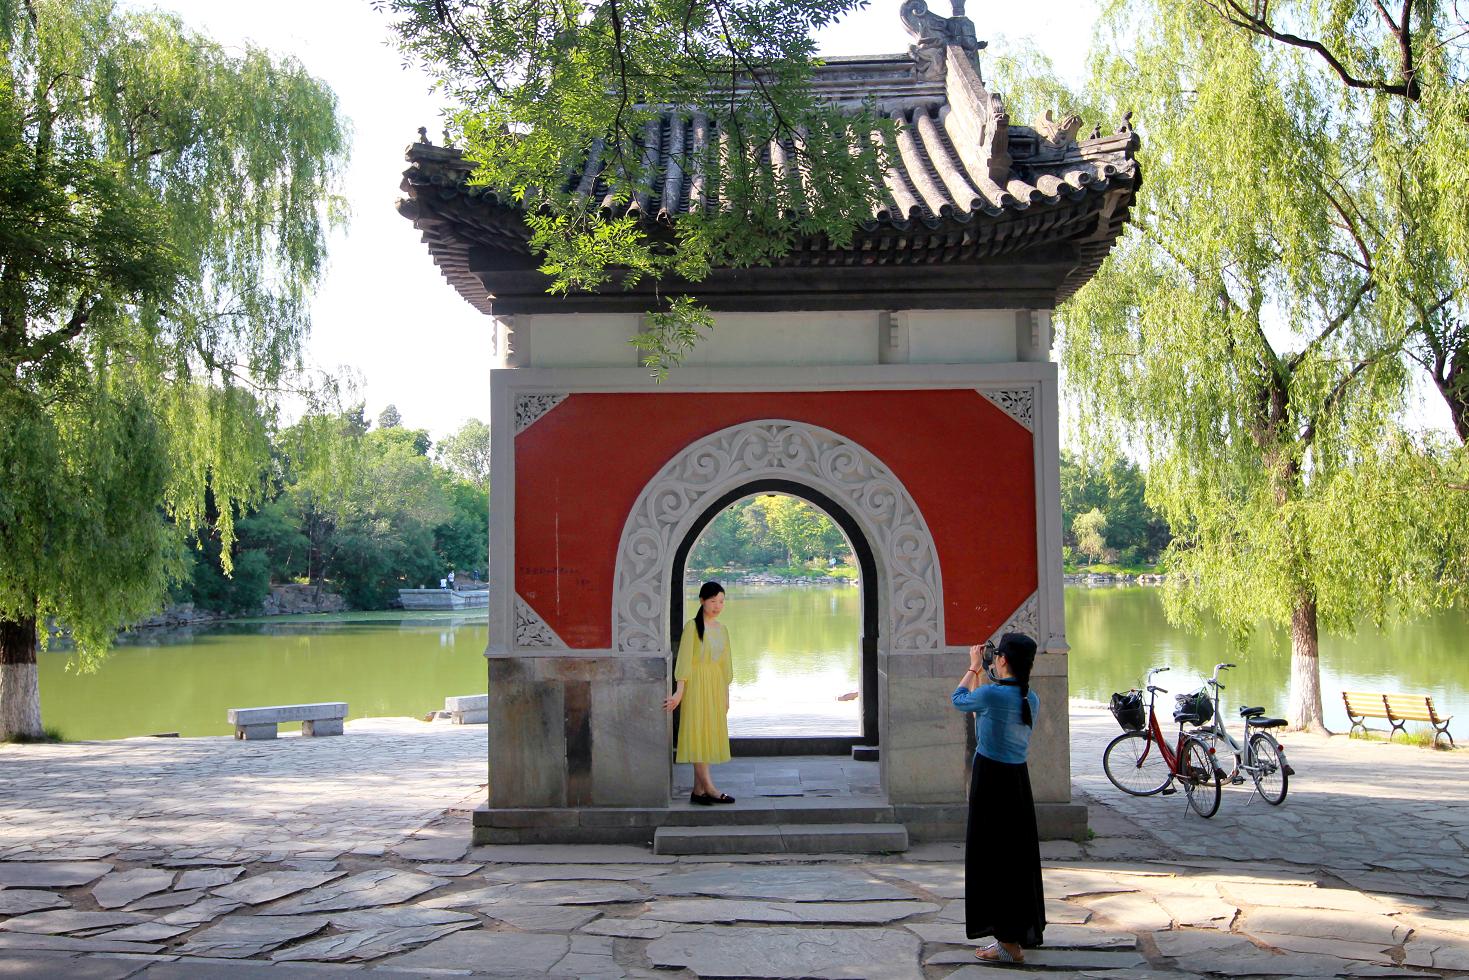 Tourists take pictures at the Ciji Temple, also known as Goddess of Flower Temple, inside Peking University on Jun. 19, 2013. Photo: Simon Song